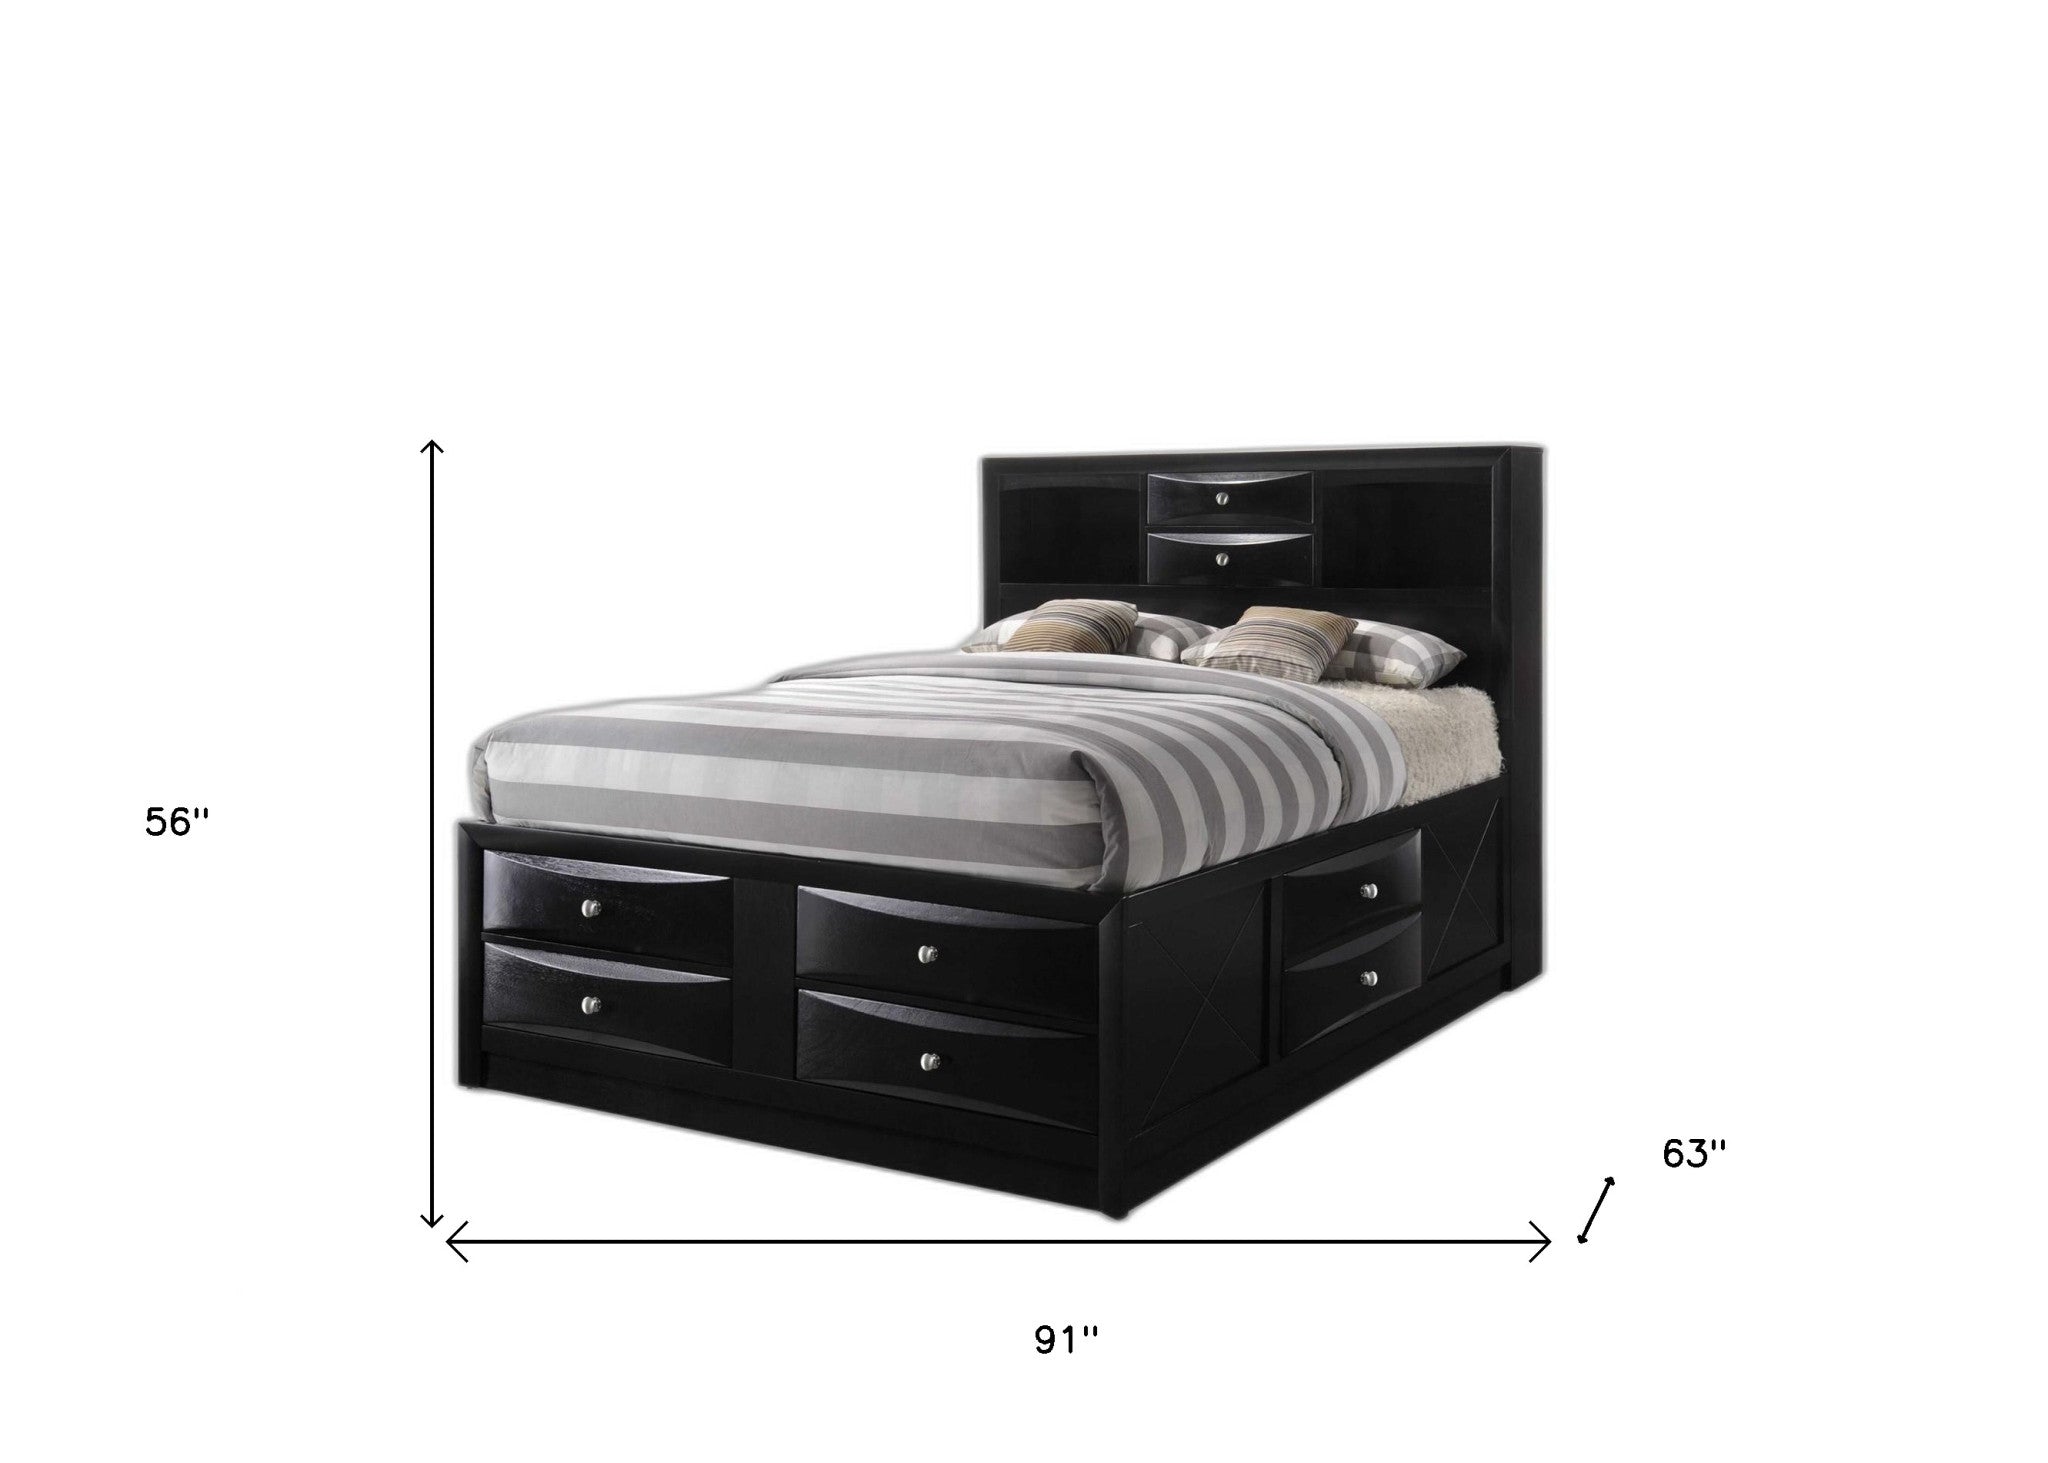 Black Multi-Drawer Queen Bed With Bookcase Headboard